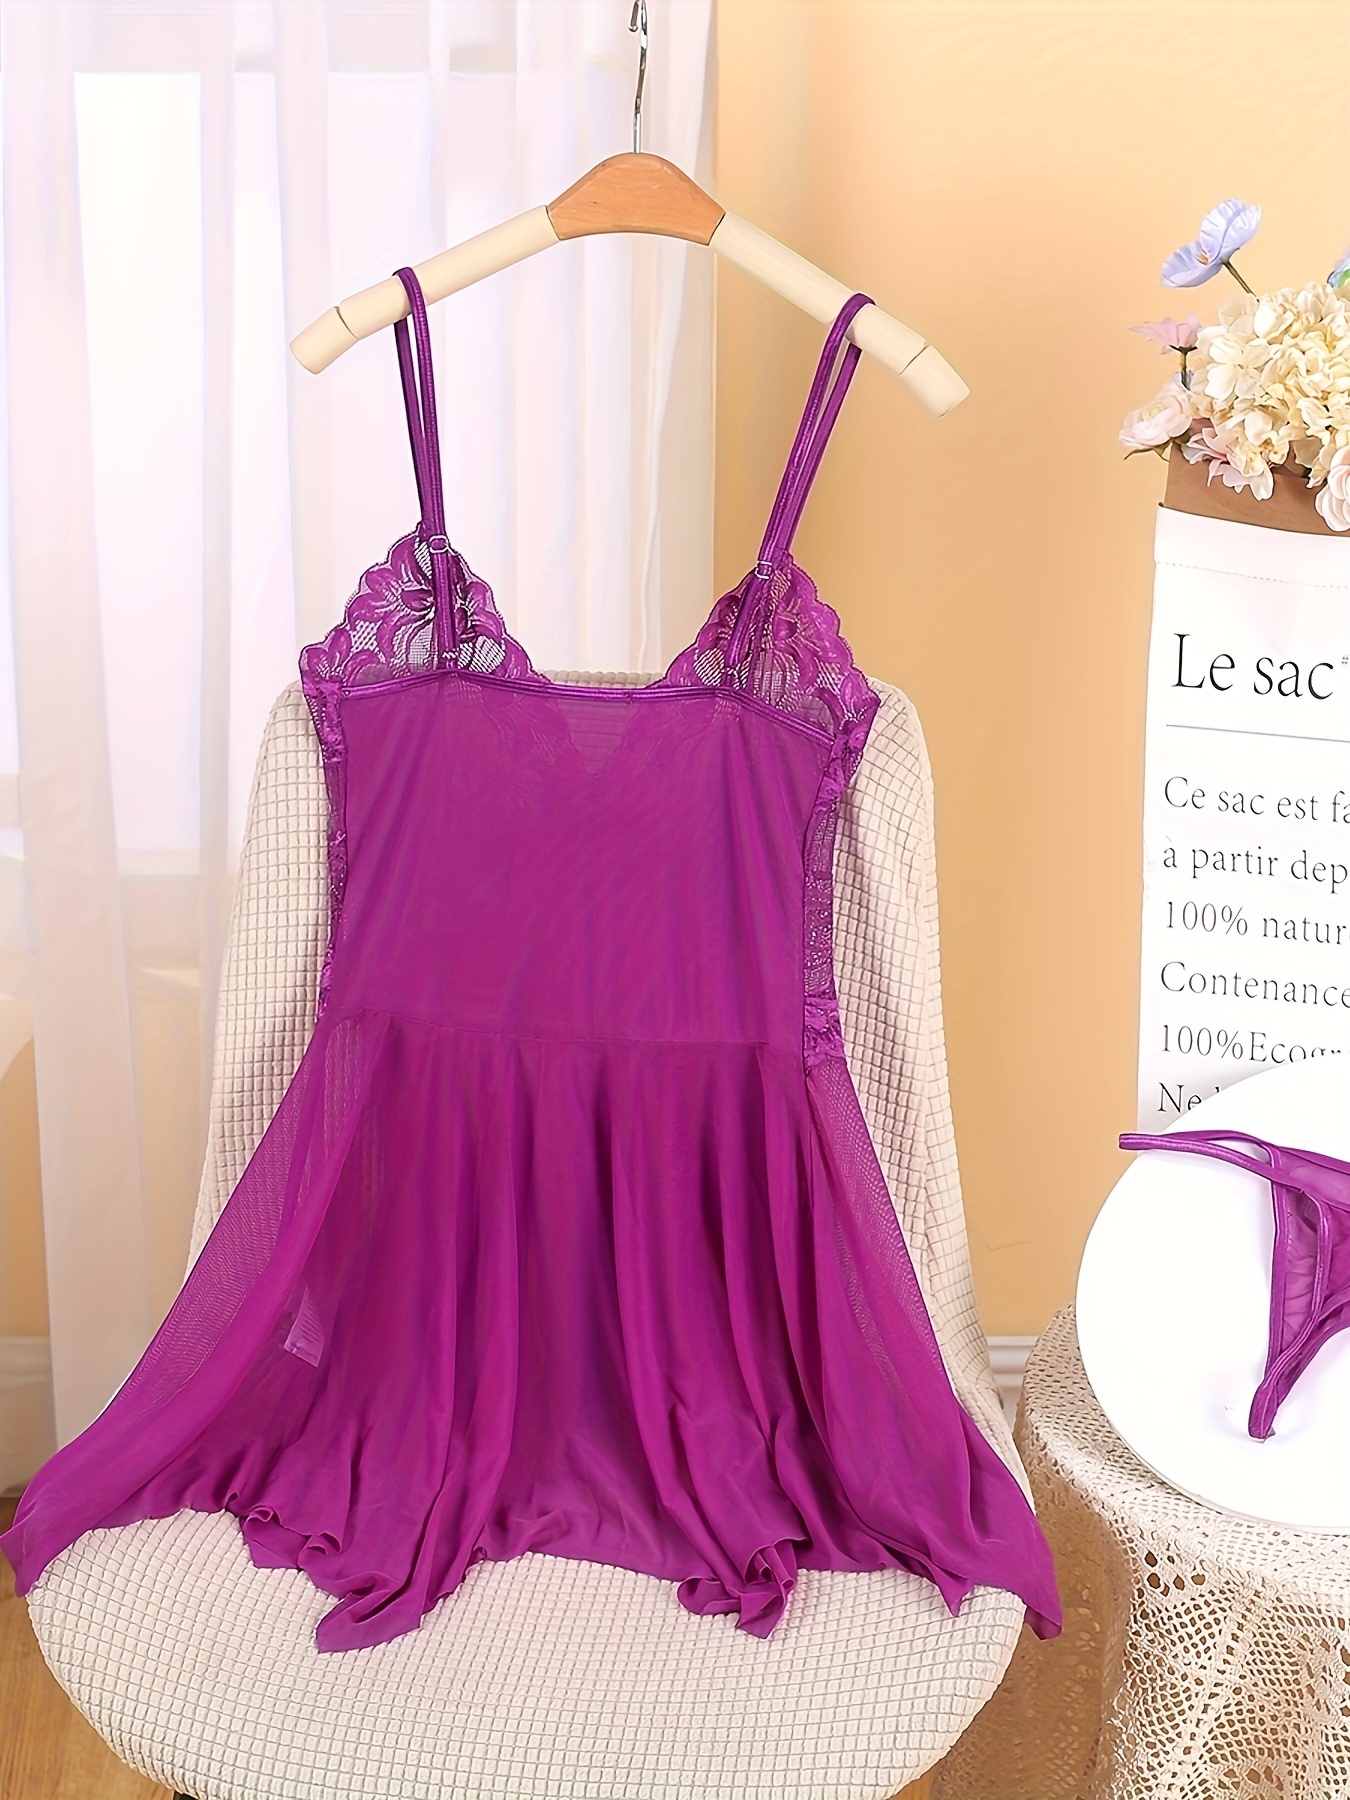  Minos Lace Bustier Set Sexy Bra Lace Lingerie Set Sexy  Underwear Embroidered Ladies Lingerie Thong Mens Underwear (Purple, XL) :  Clothing, Shoes & Jewelry